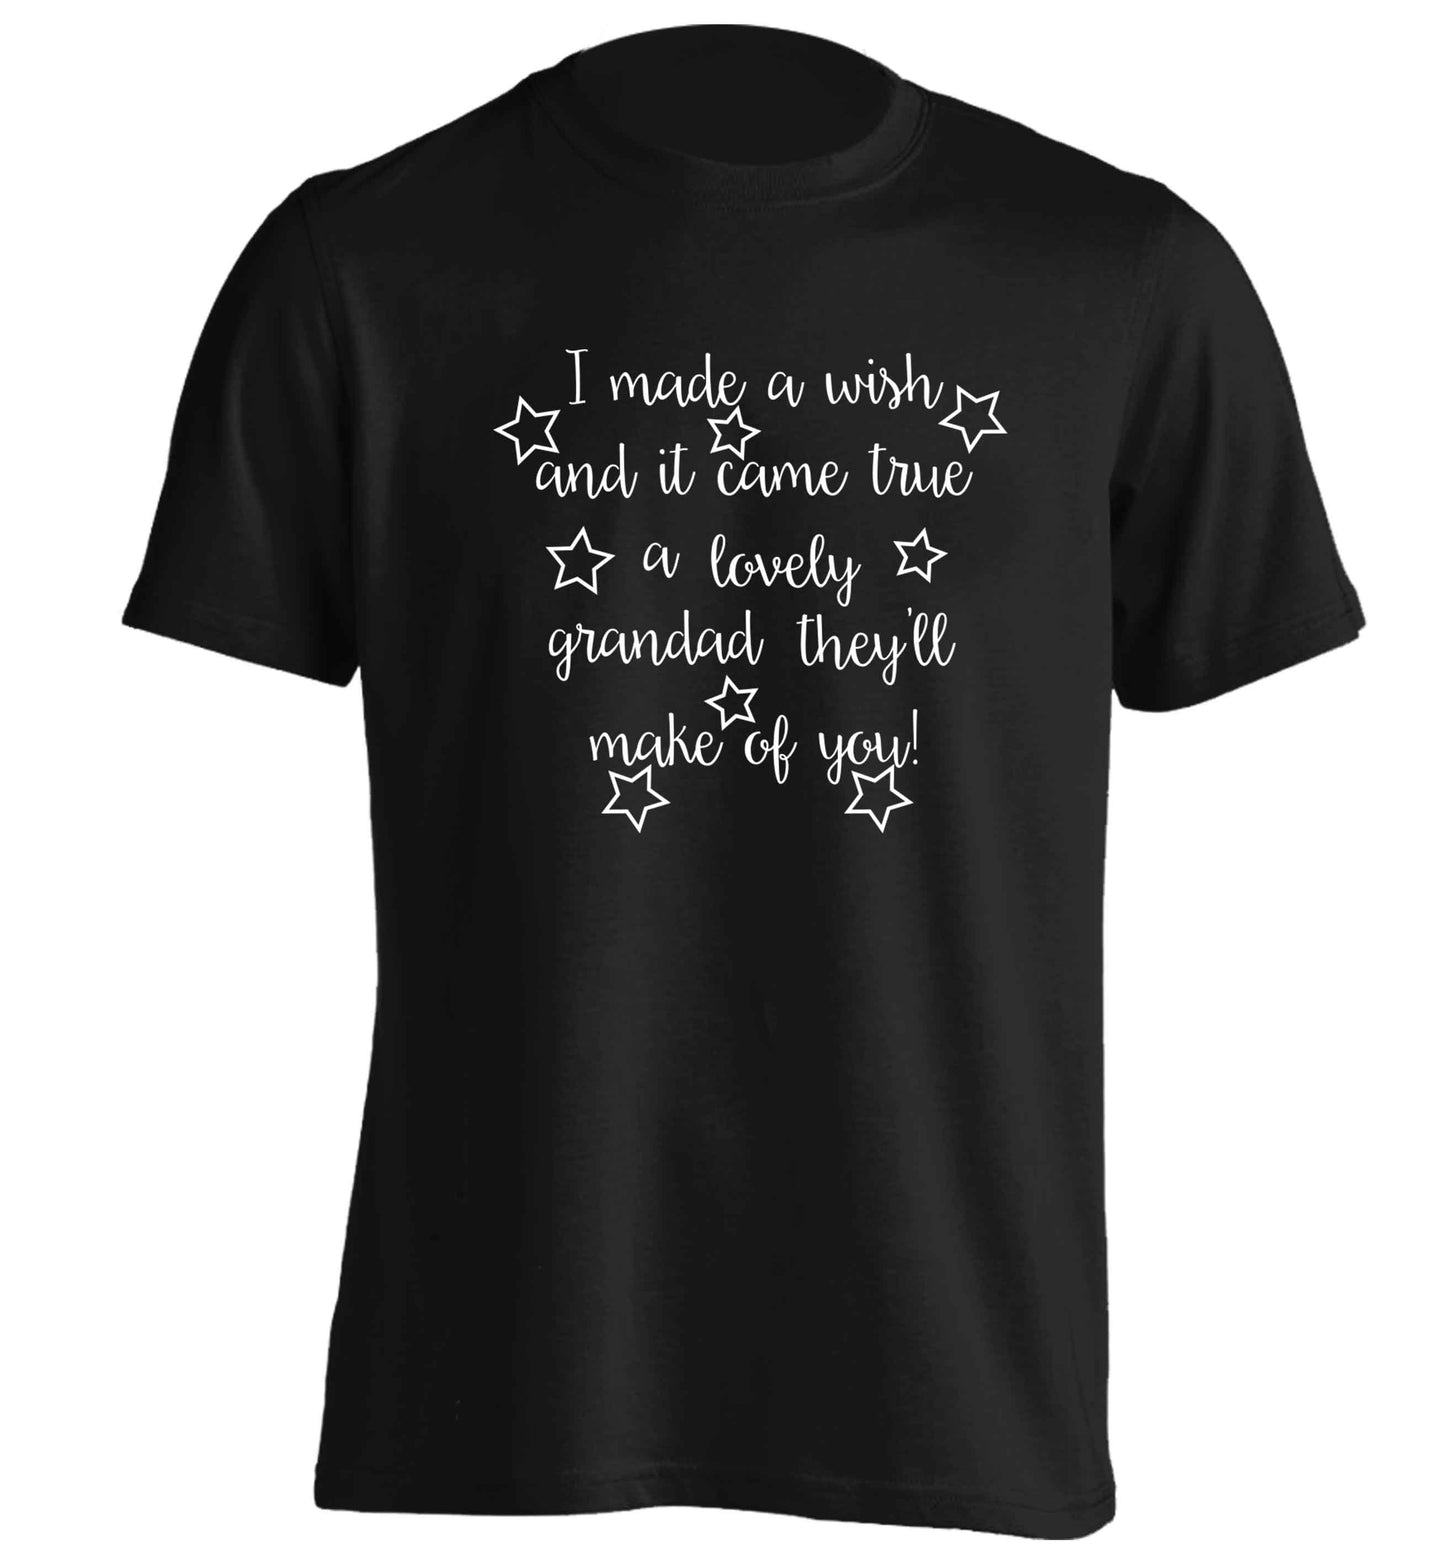 I made a wish and it came true a lovely grandad they'll make of you! adults unisex black Tshirt 2XL